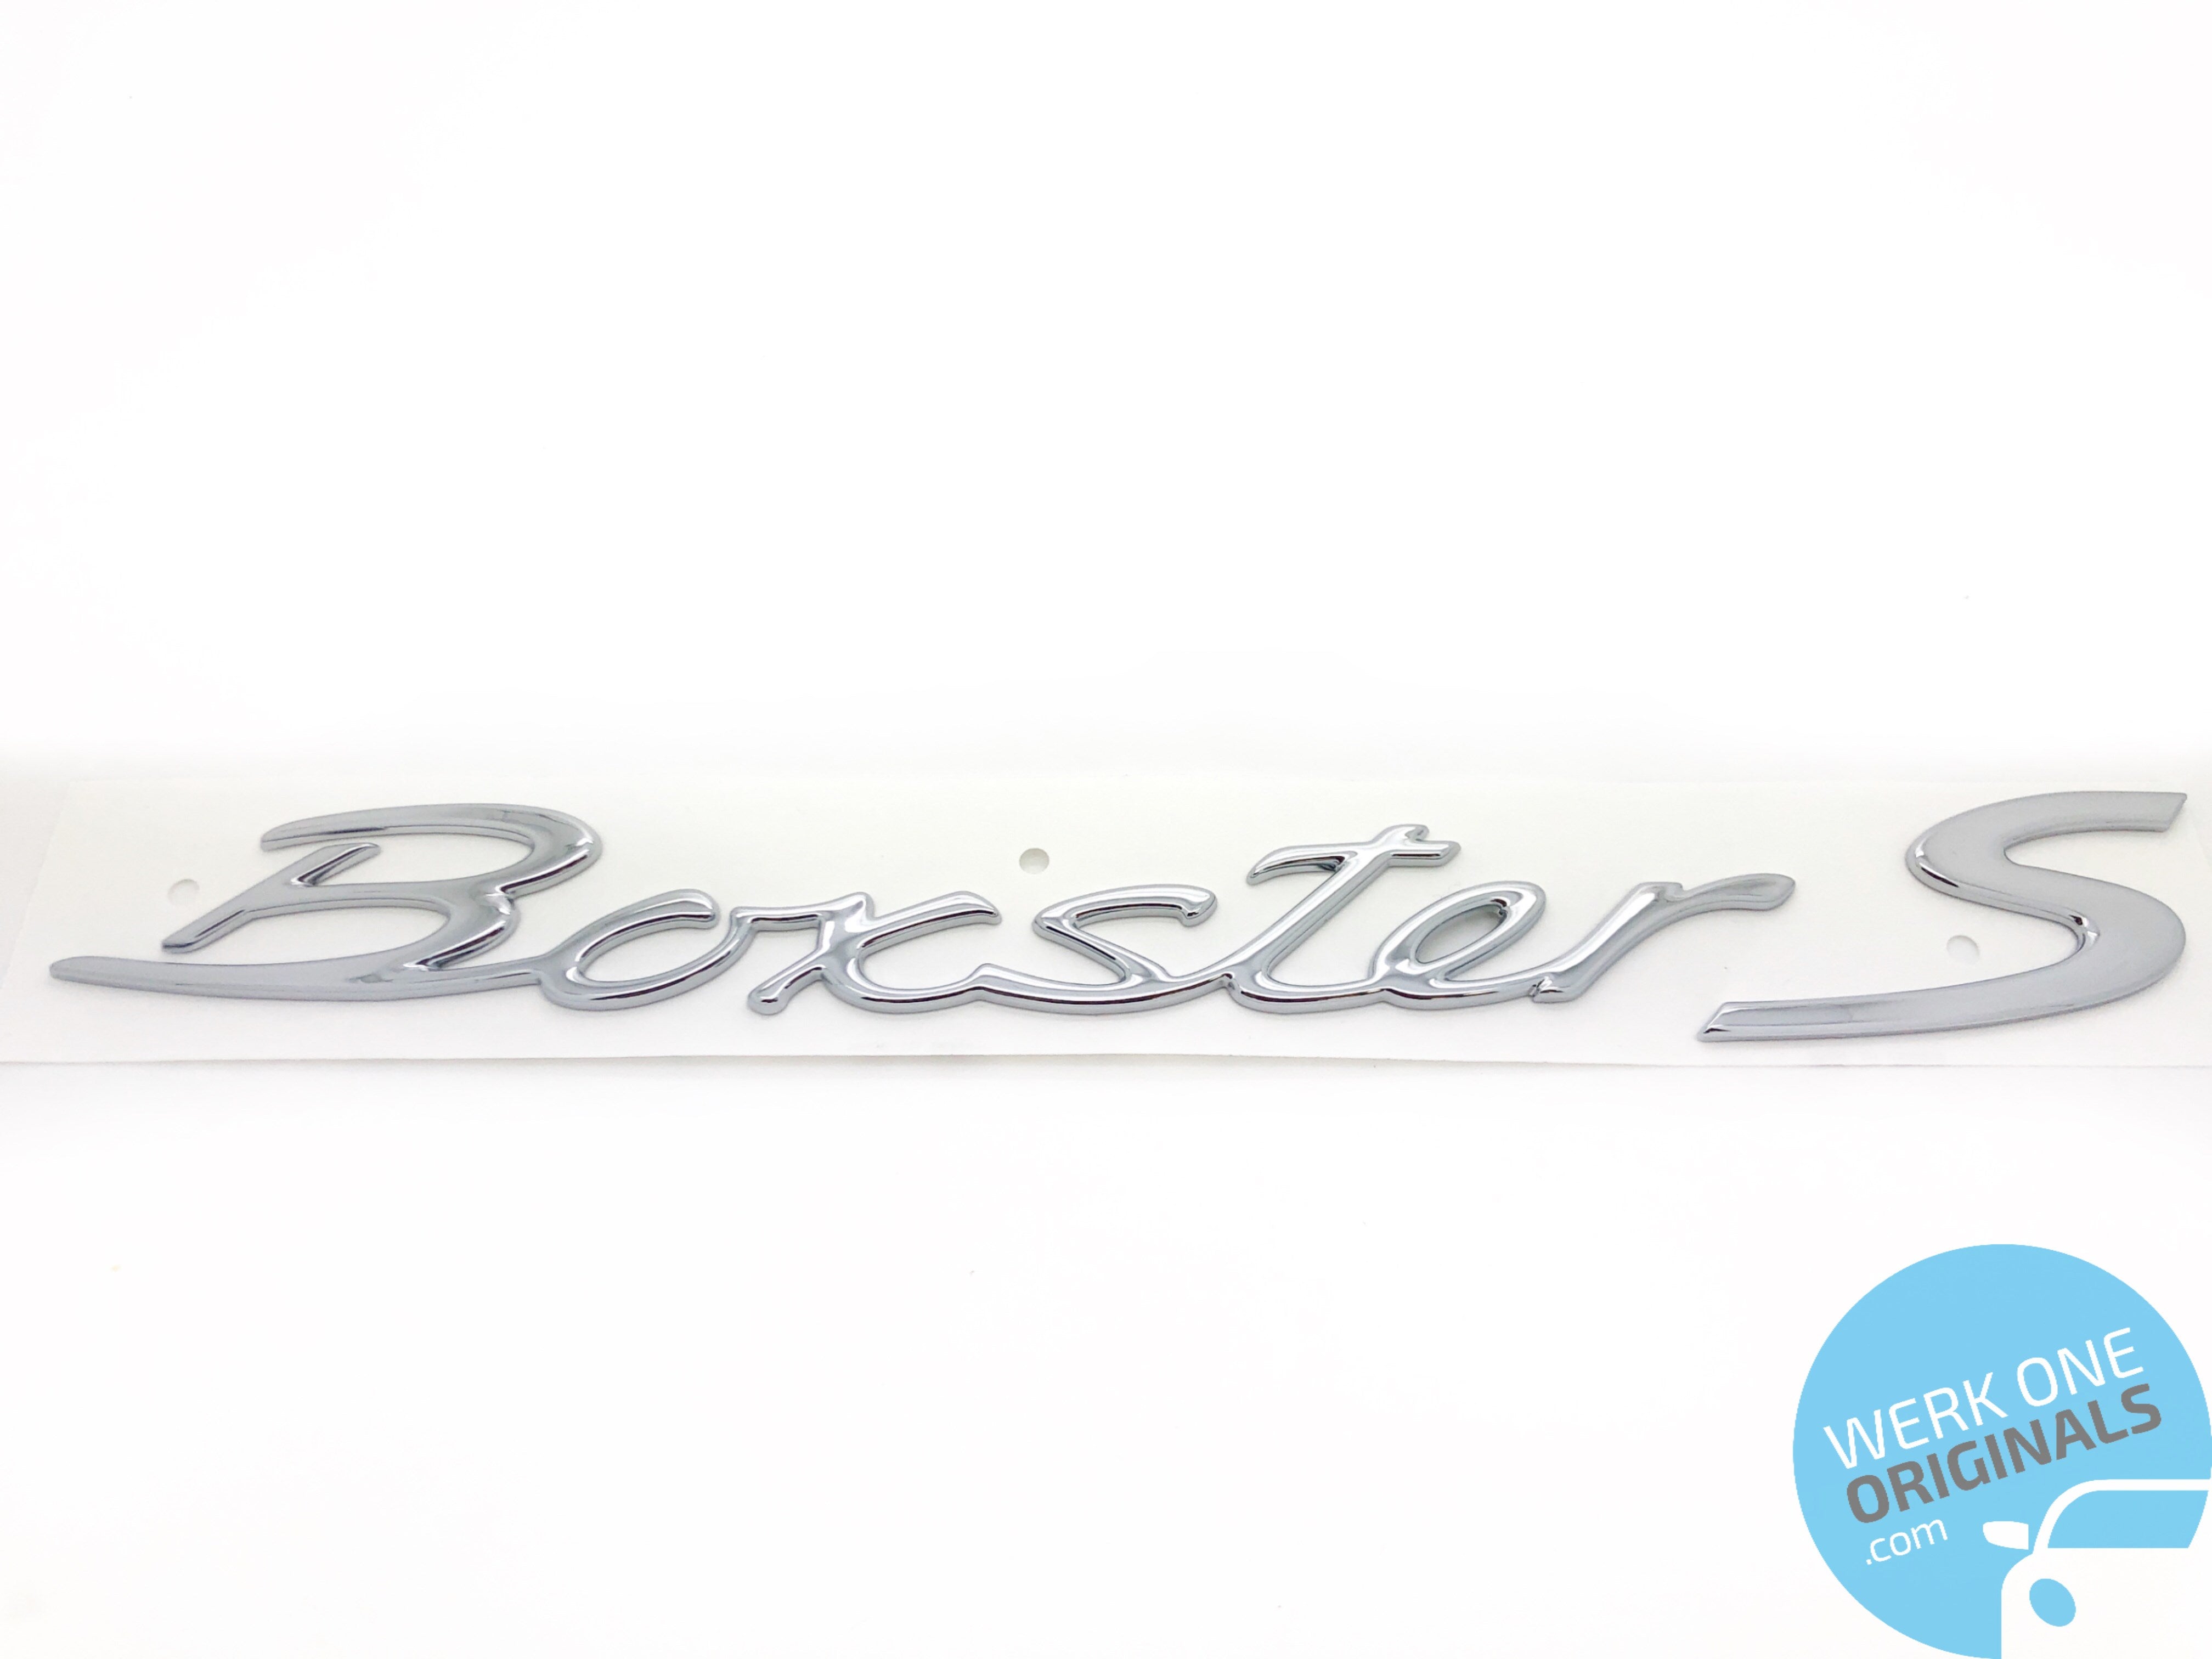 Porsche 'Boxster S' Rear Badge in Chrome Silver for Boxster S Type 987 Models